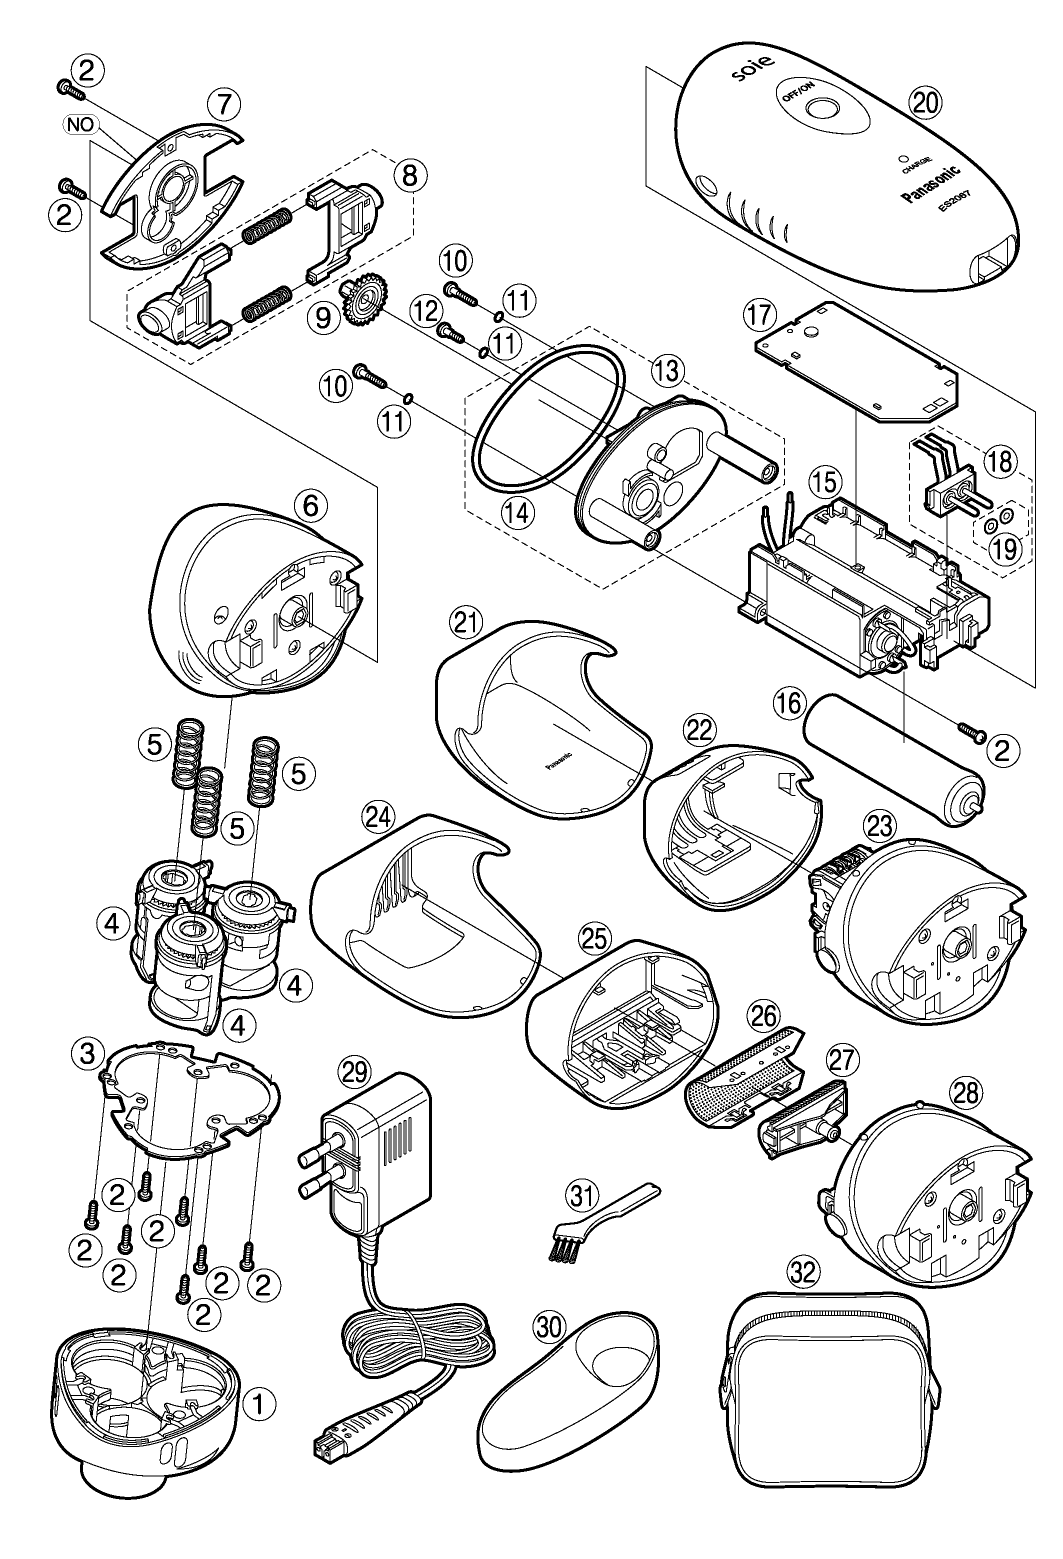 ES-2067: Exploded View